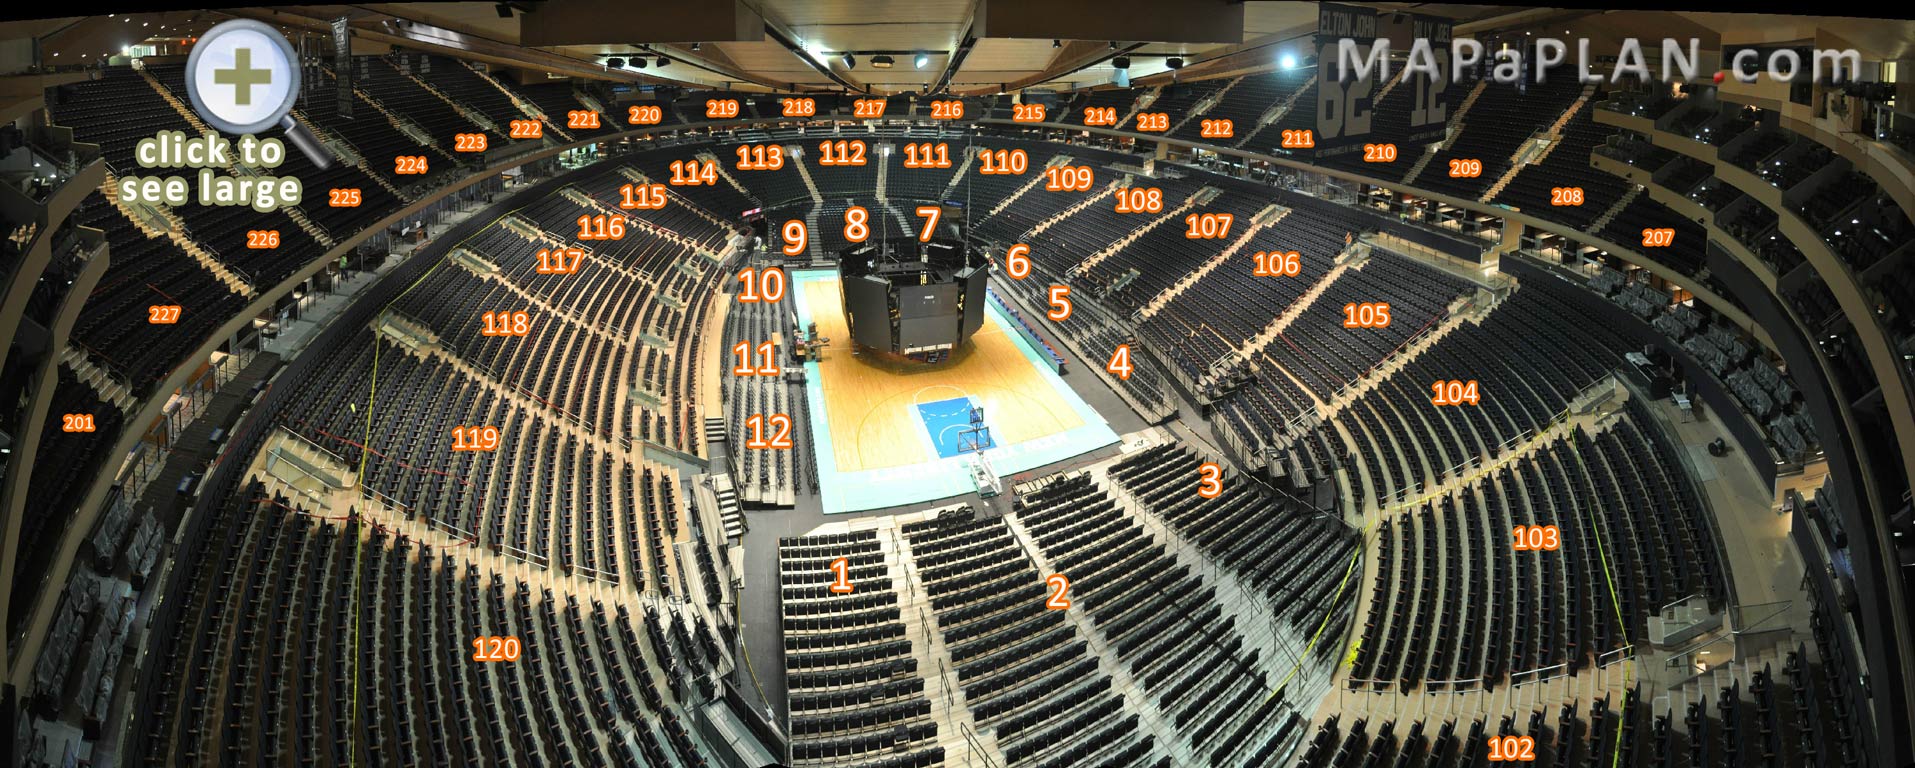 madison square garden seating chart        <h3 class=